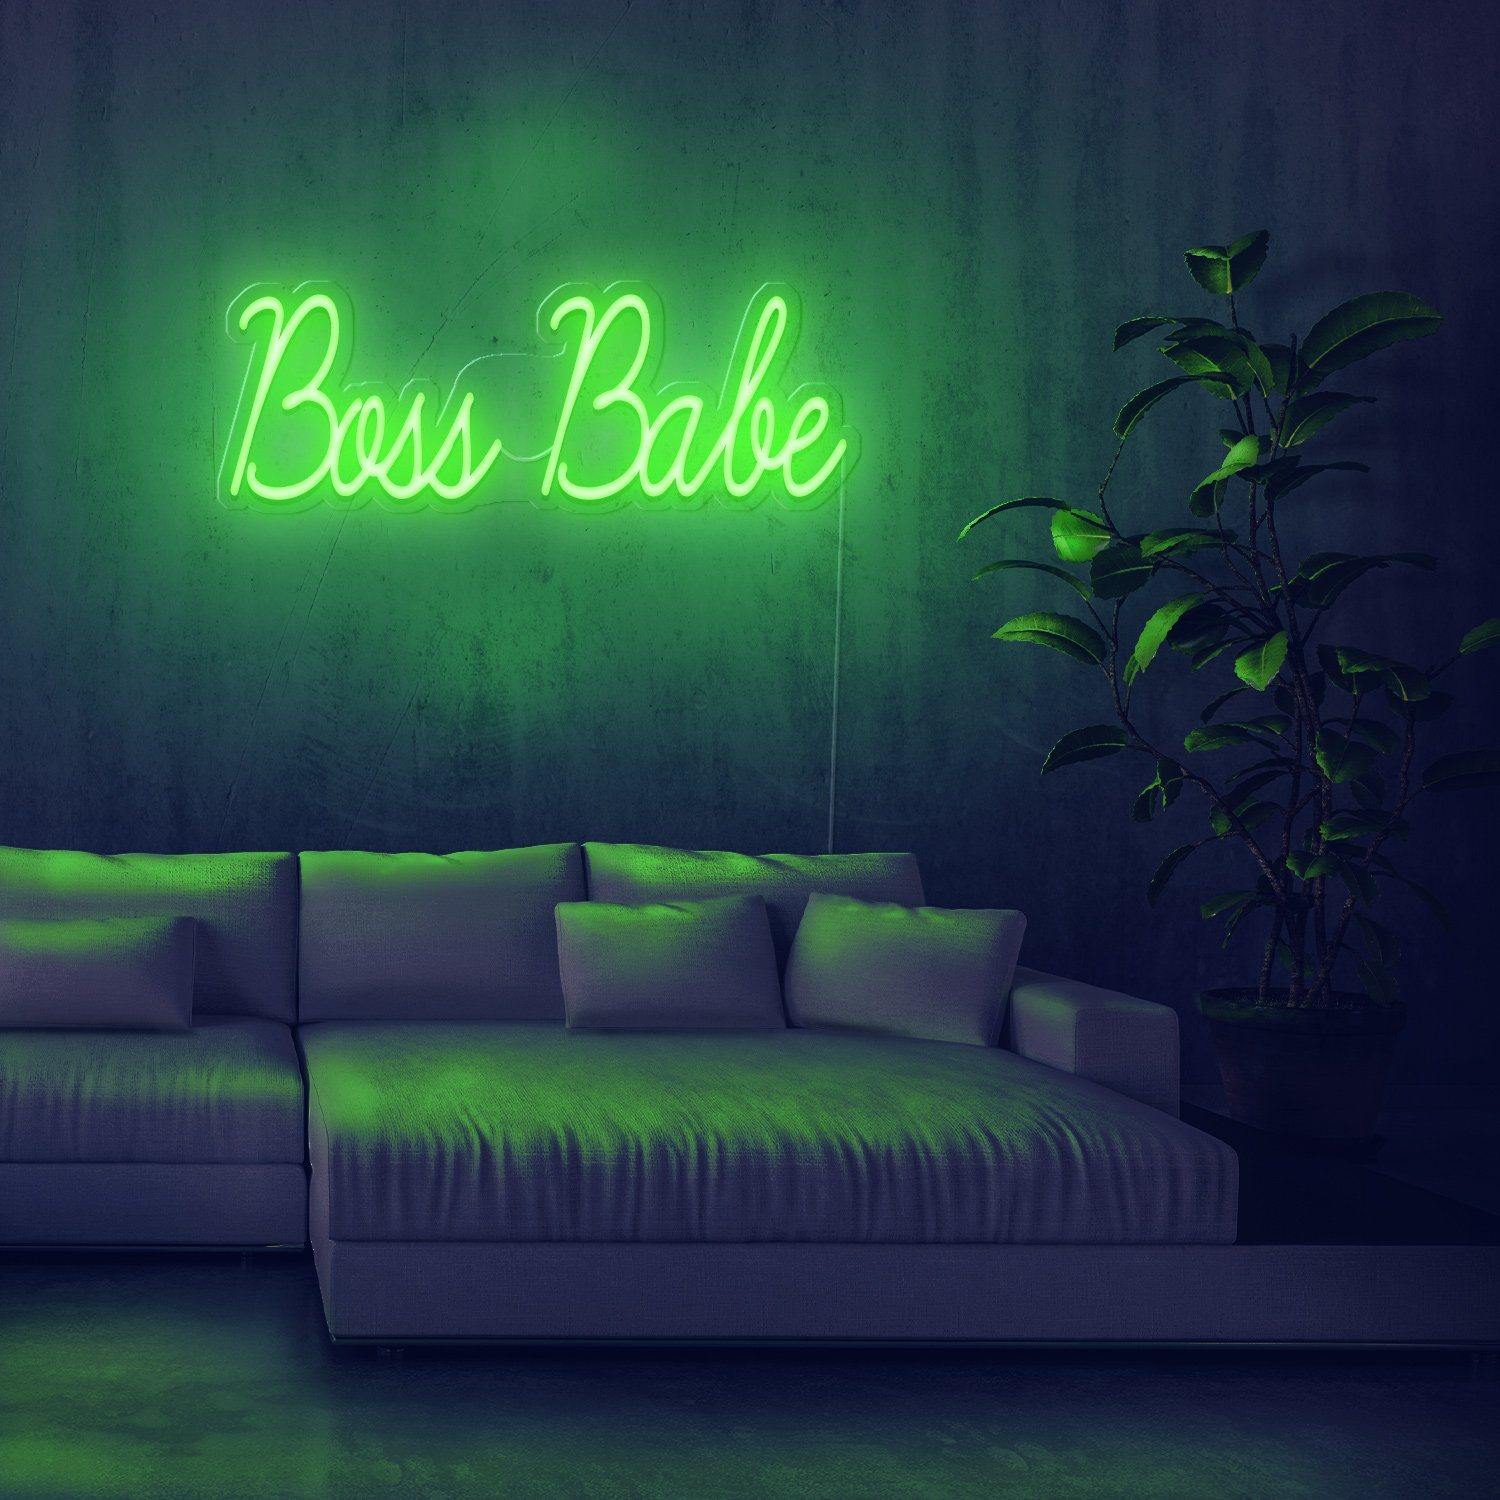 Boss Babe Neon Sign - NeonFerry